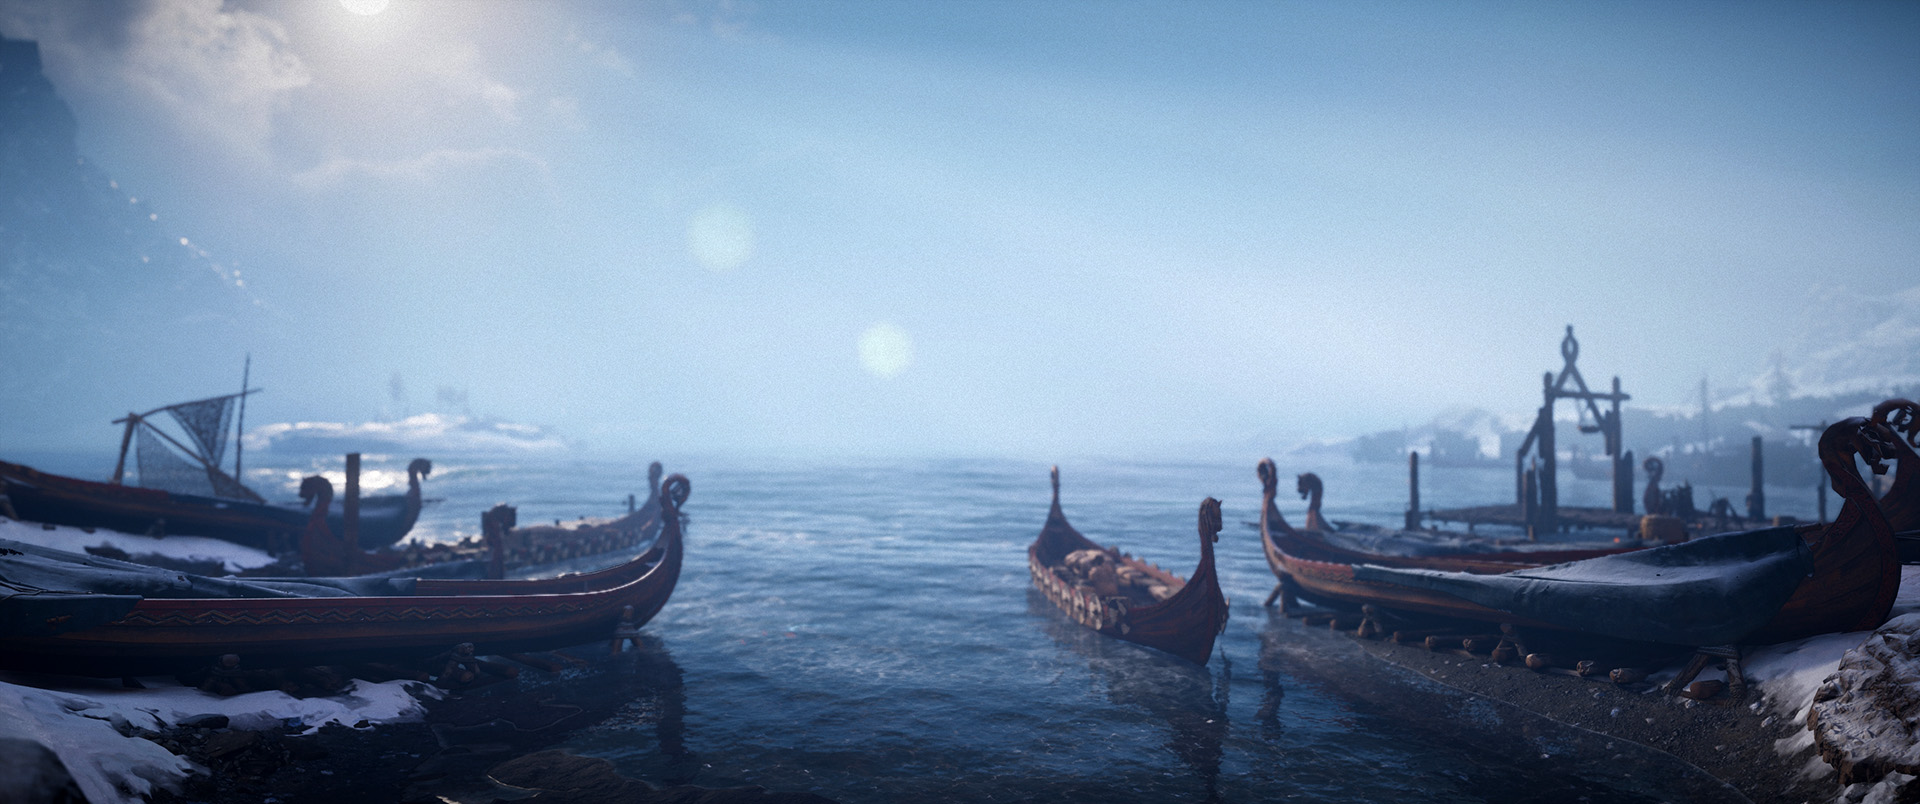 General 1920x804 screen shot Assassin's Creed Assassin's Creed: Valhalla video games PC gaming boat vehicle